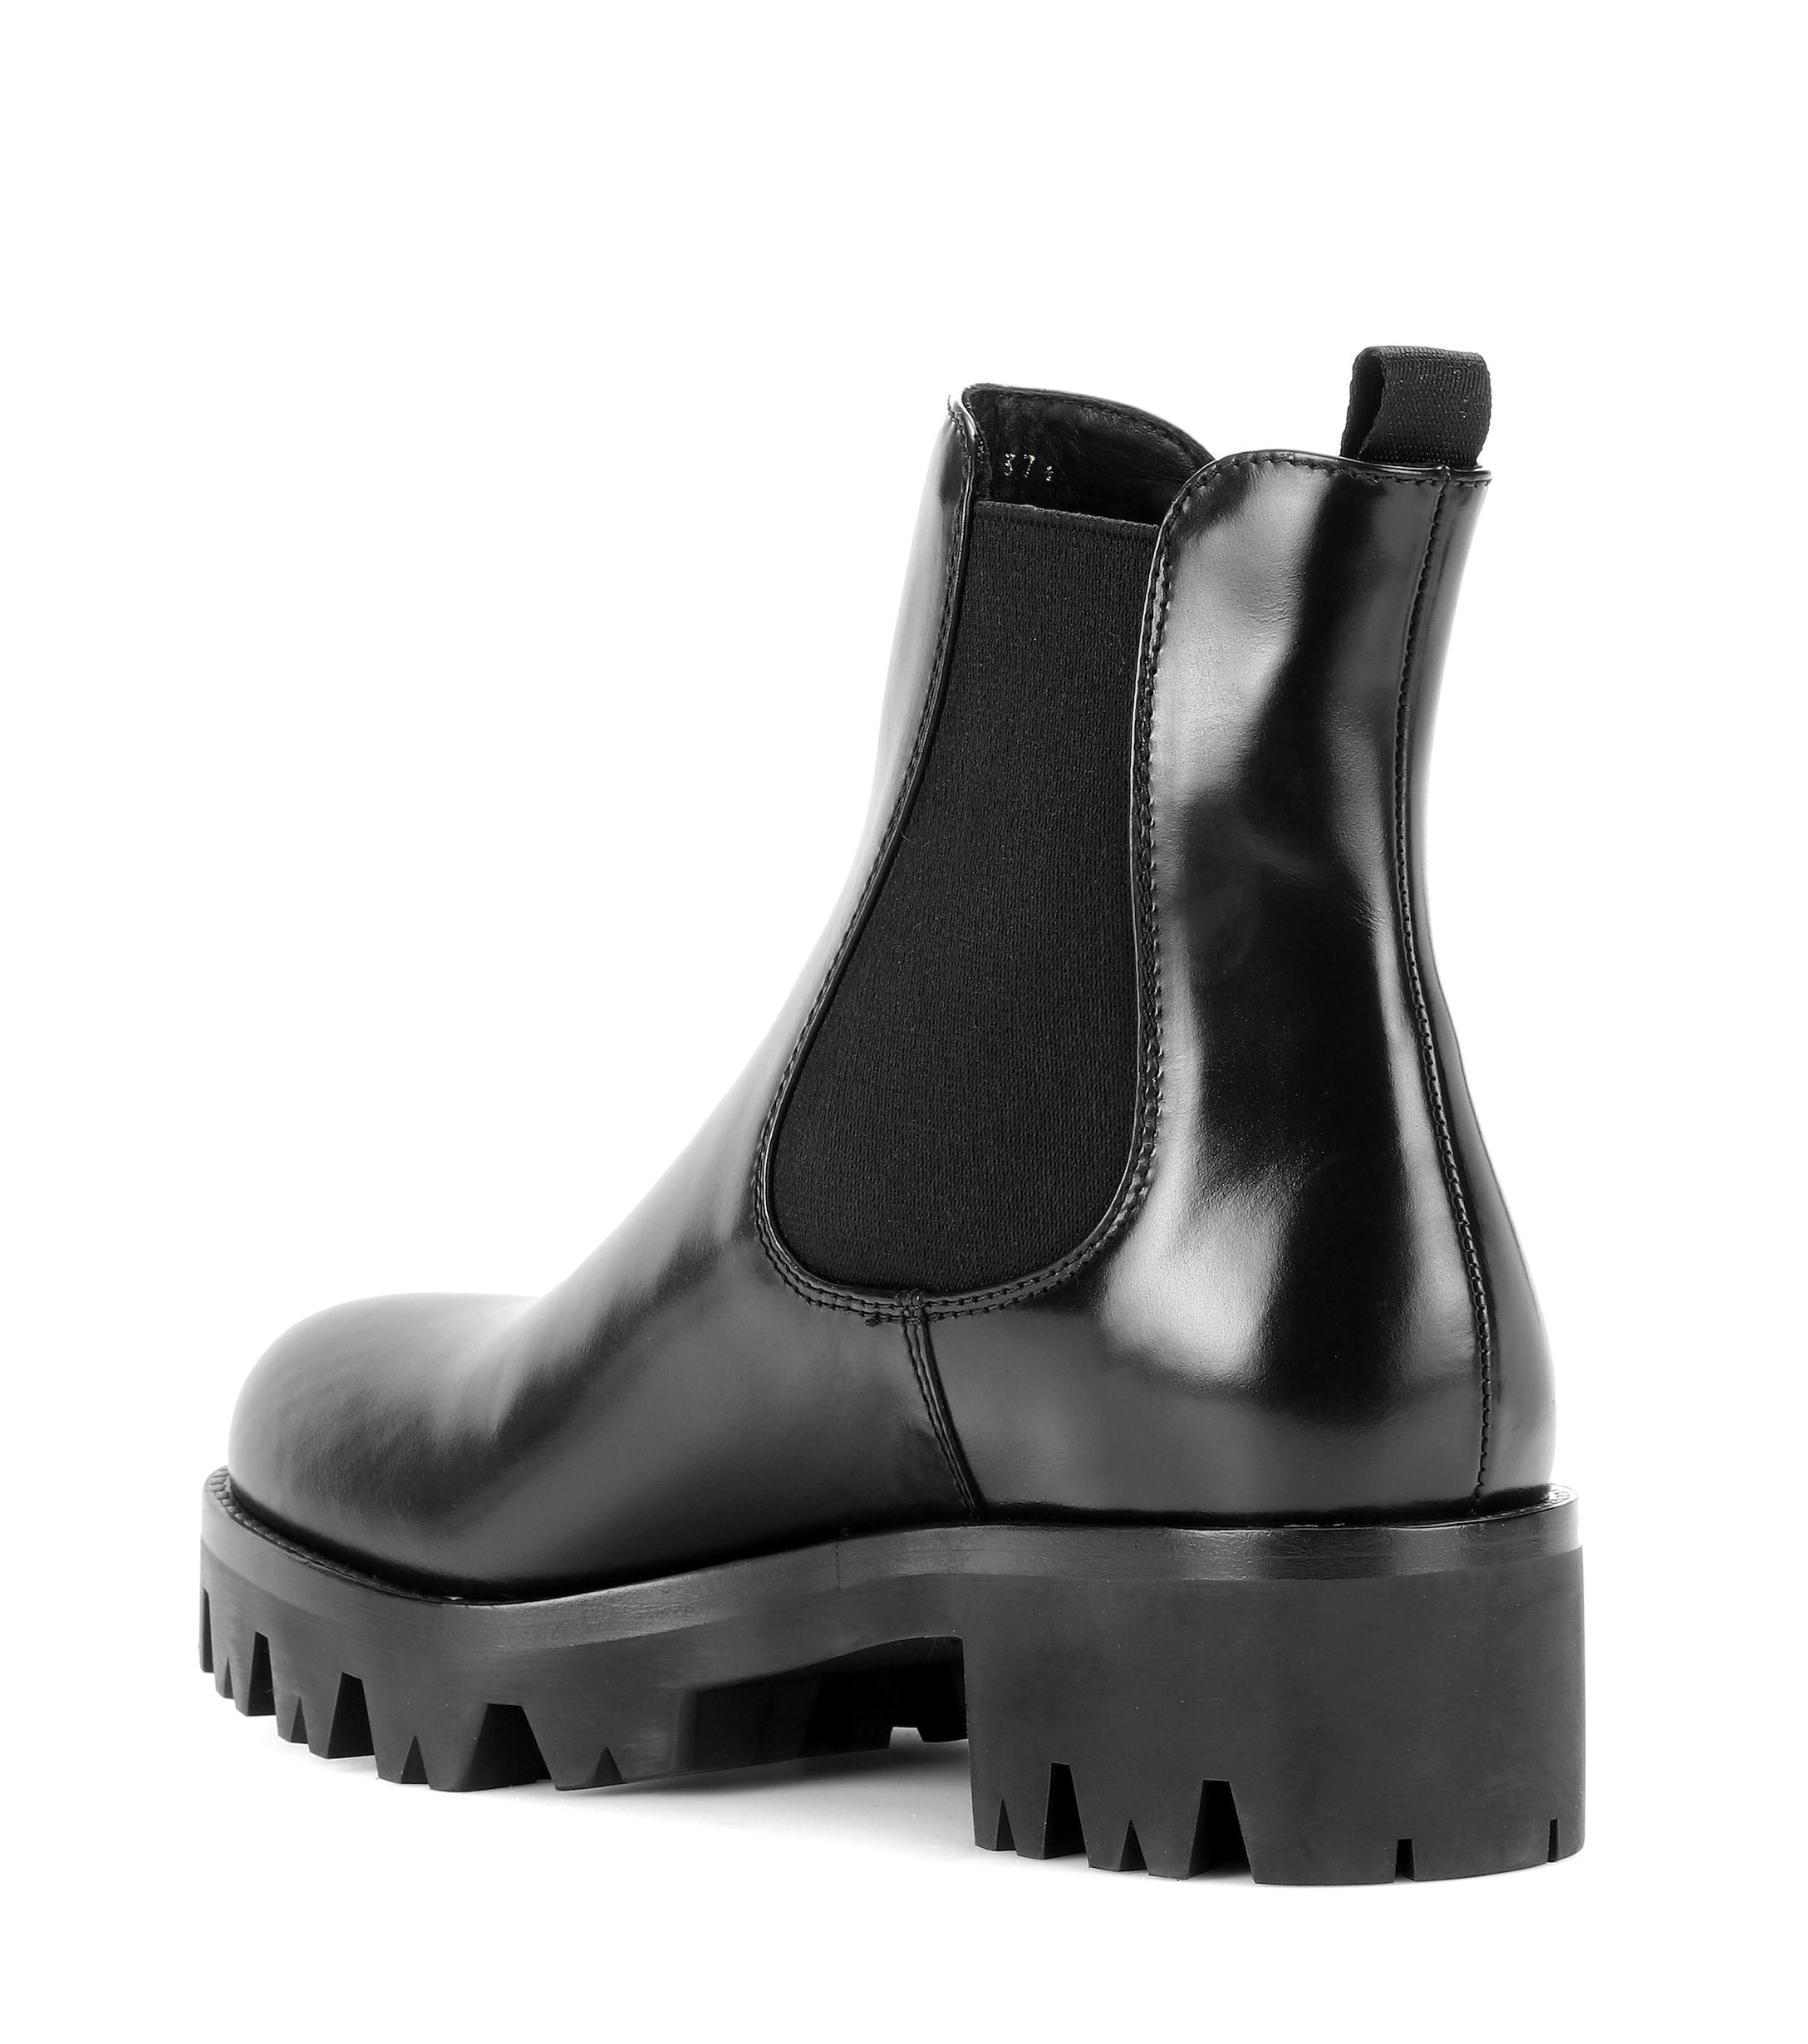 Prada Leather Chelsea Boots in Black - Lyst